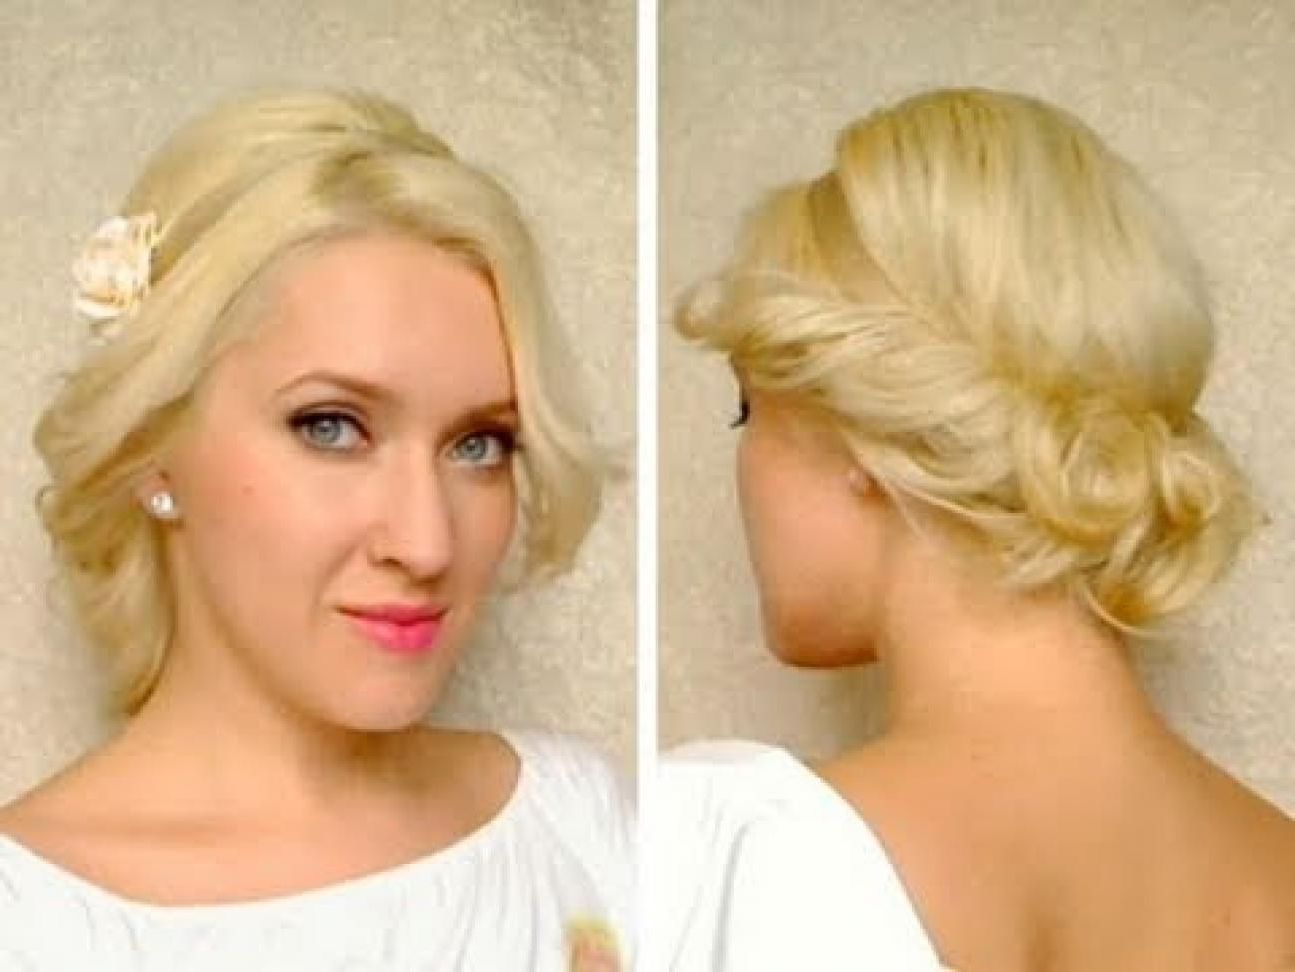 Cute Updo Hairstyles For Medium Length Hair – Hairstyle For Women & Man Within Updo Hairstyles For Short Hair For Wedding (View 3 of 15)